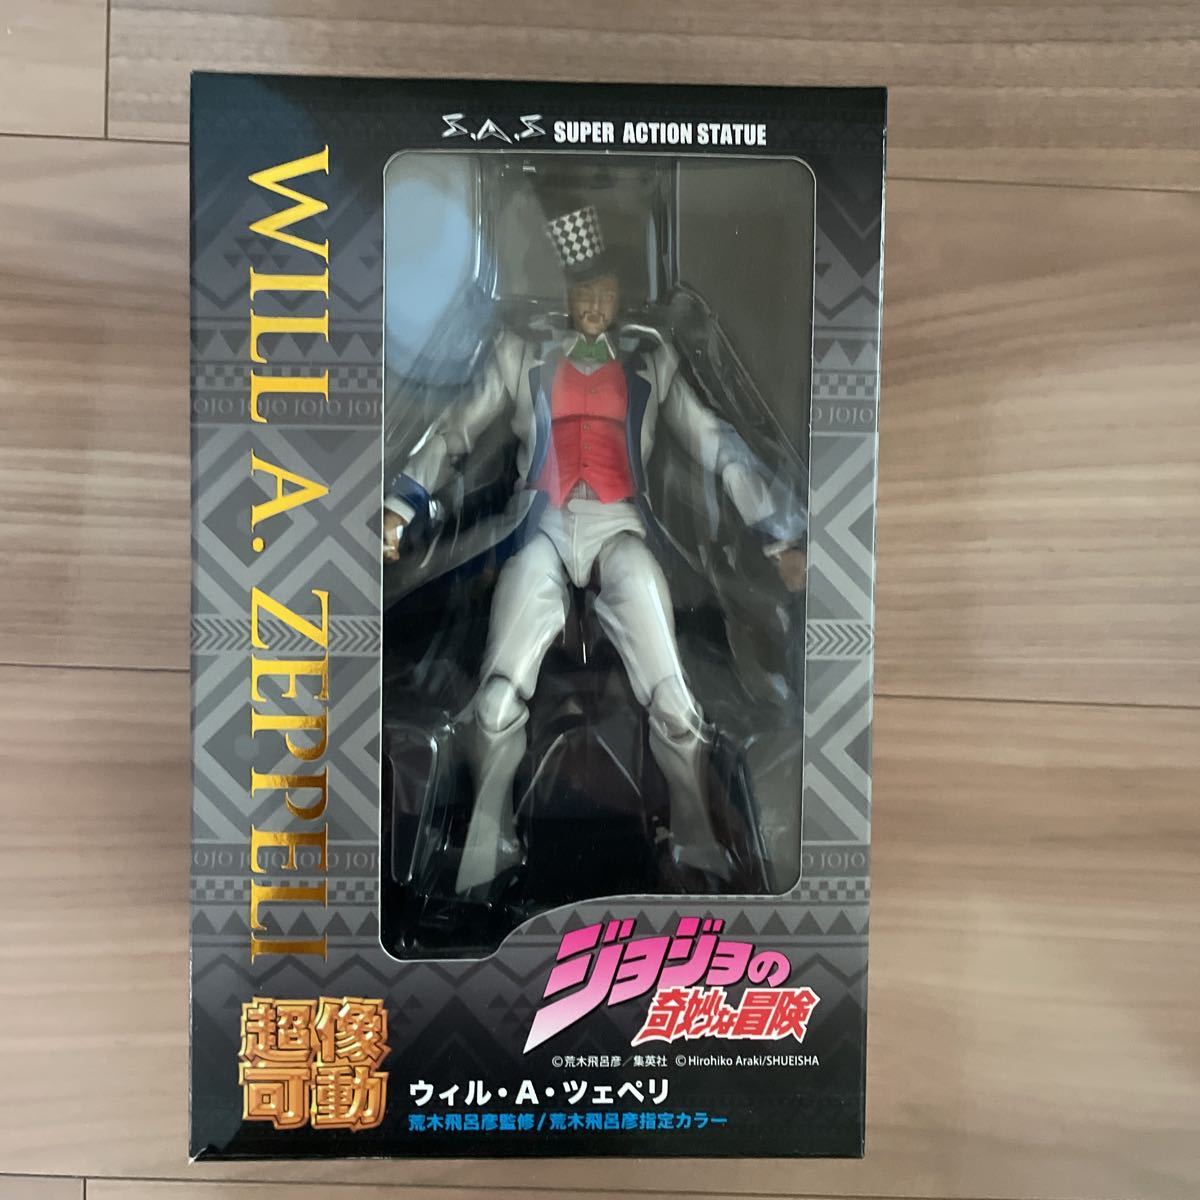  unopened new goods JoJo's Bizarre Adventure no. 1 part Phantom b Lad super image moveable Will *A*tsepeliWF2021[ winter ] limitation with special favor 